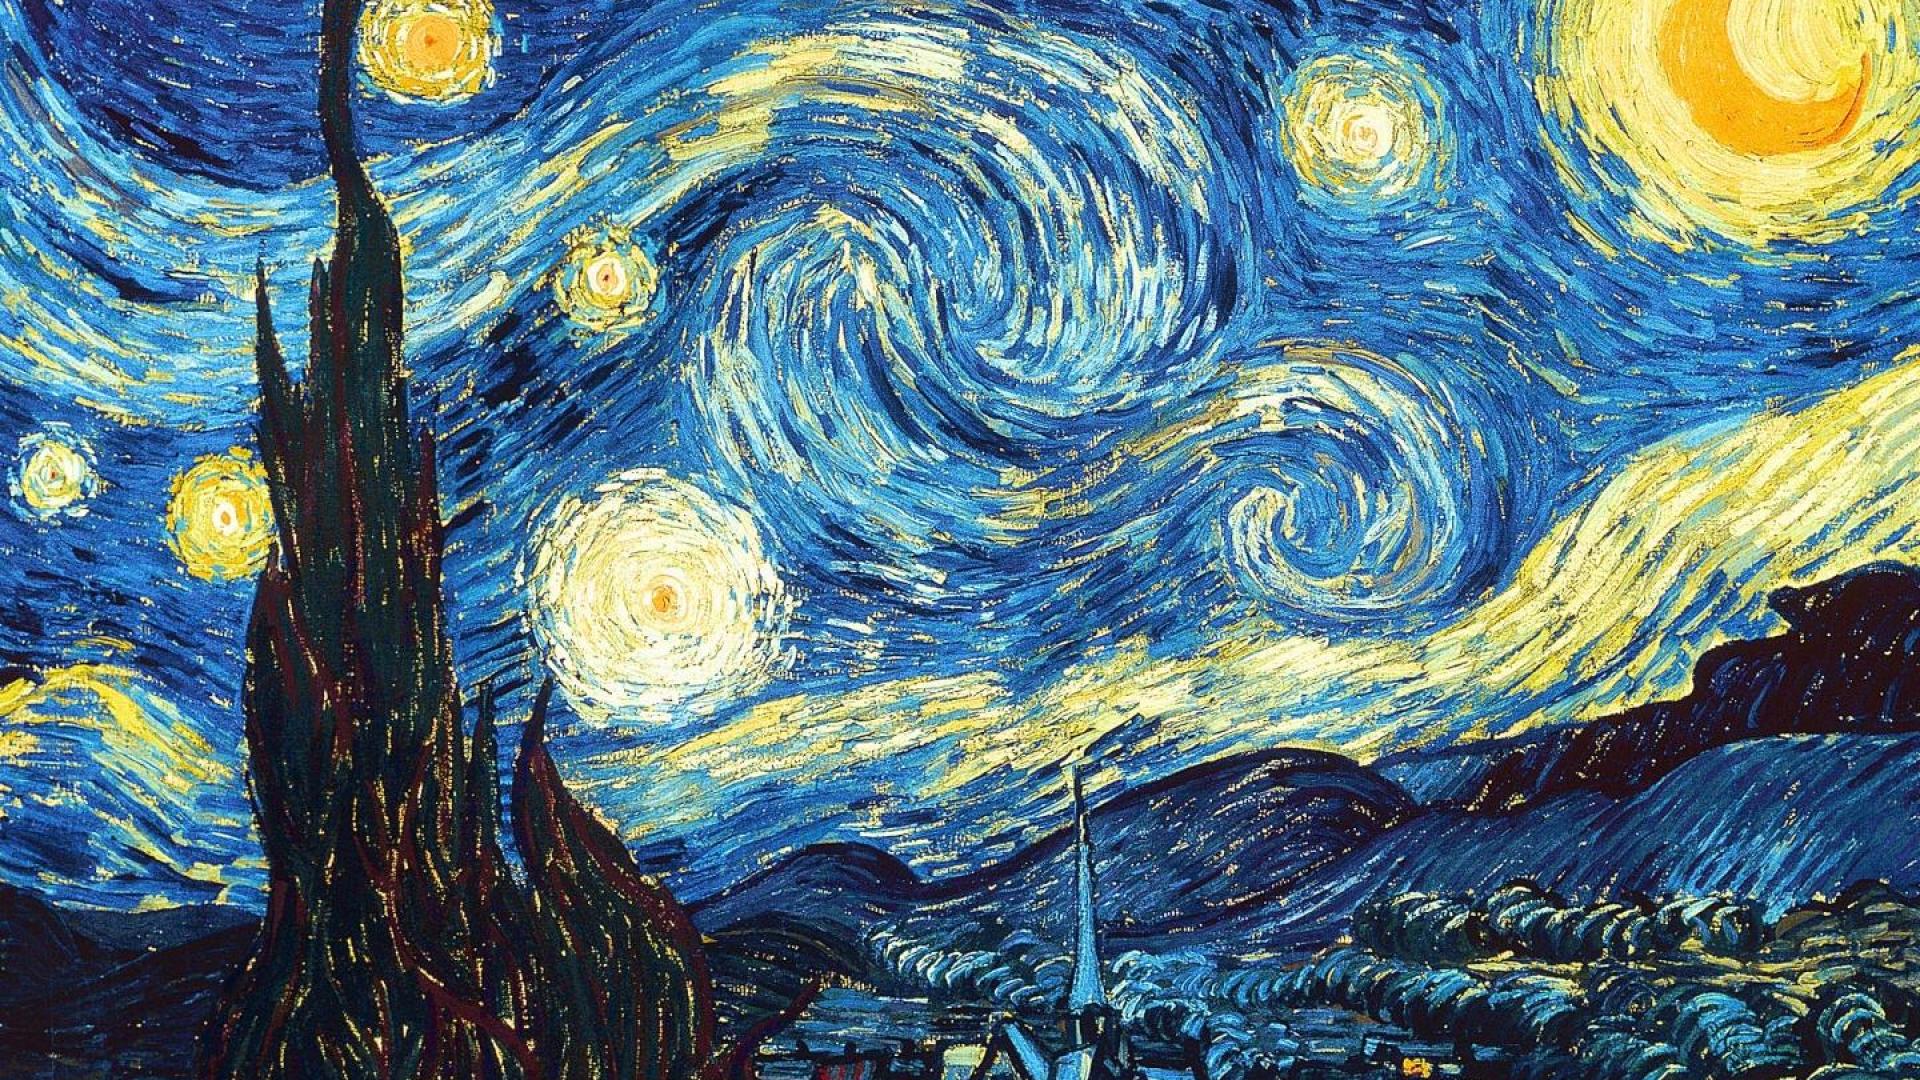 Vincent van gogh starry night - - High Quality and other